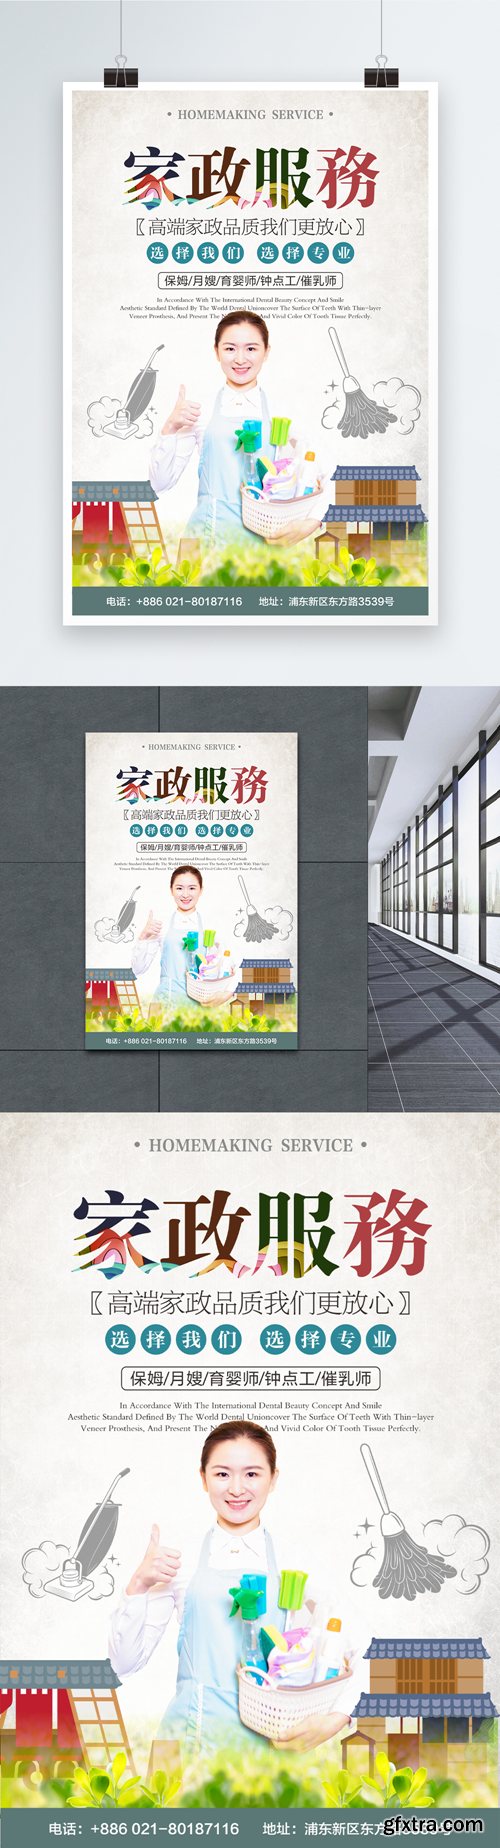 high end housekeeping service poster